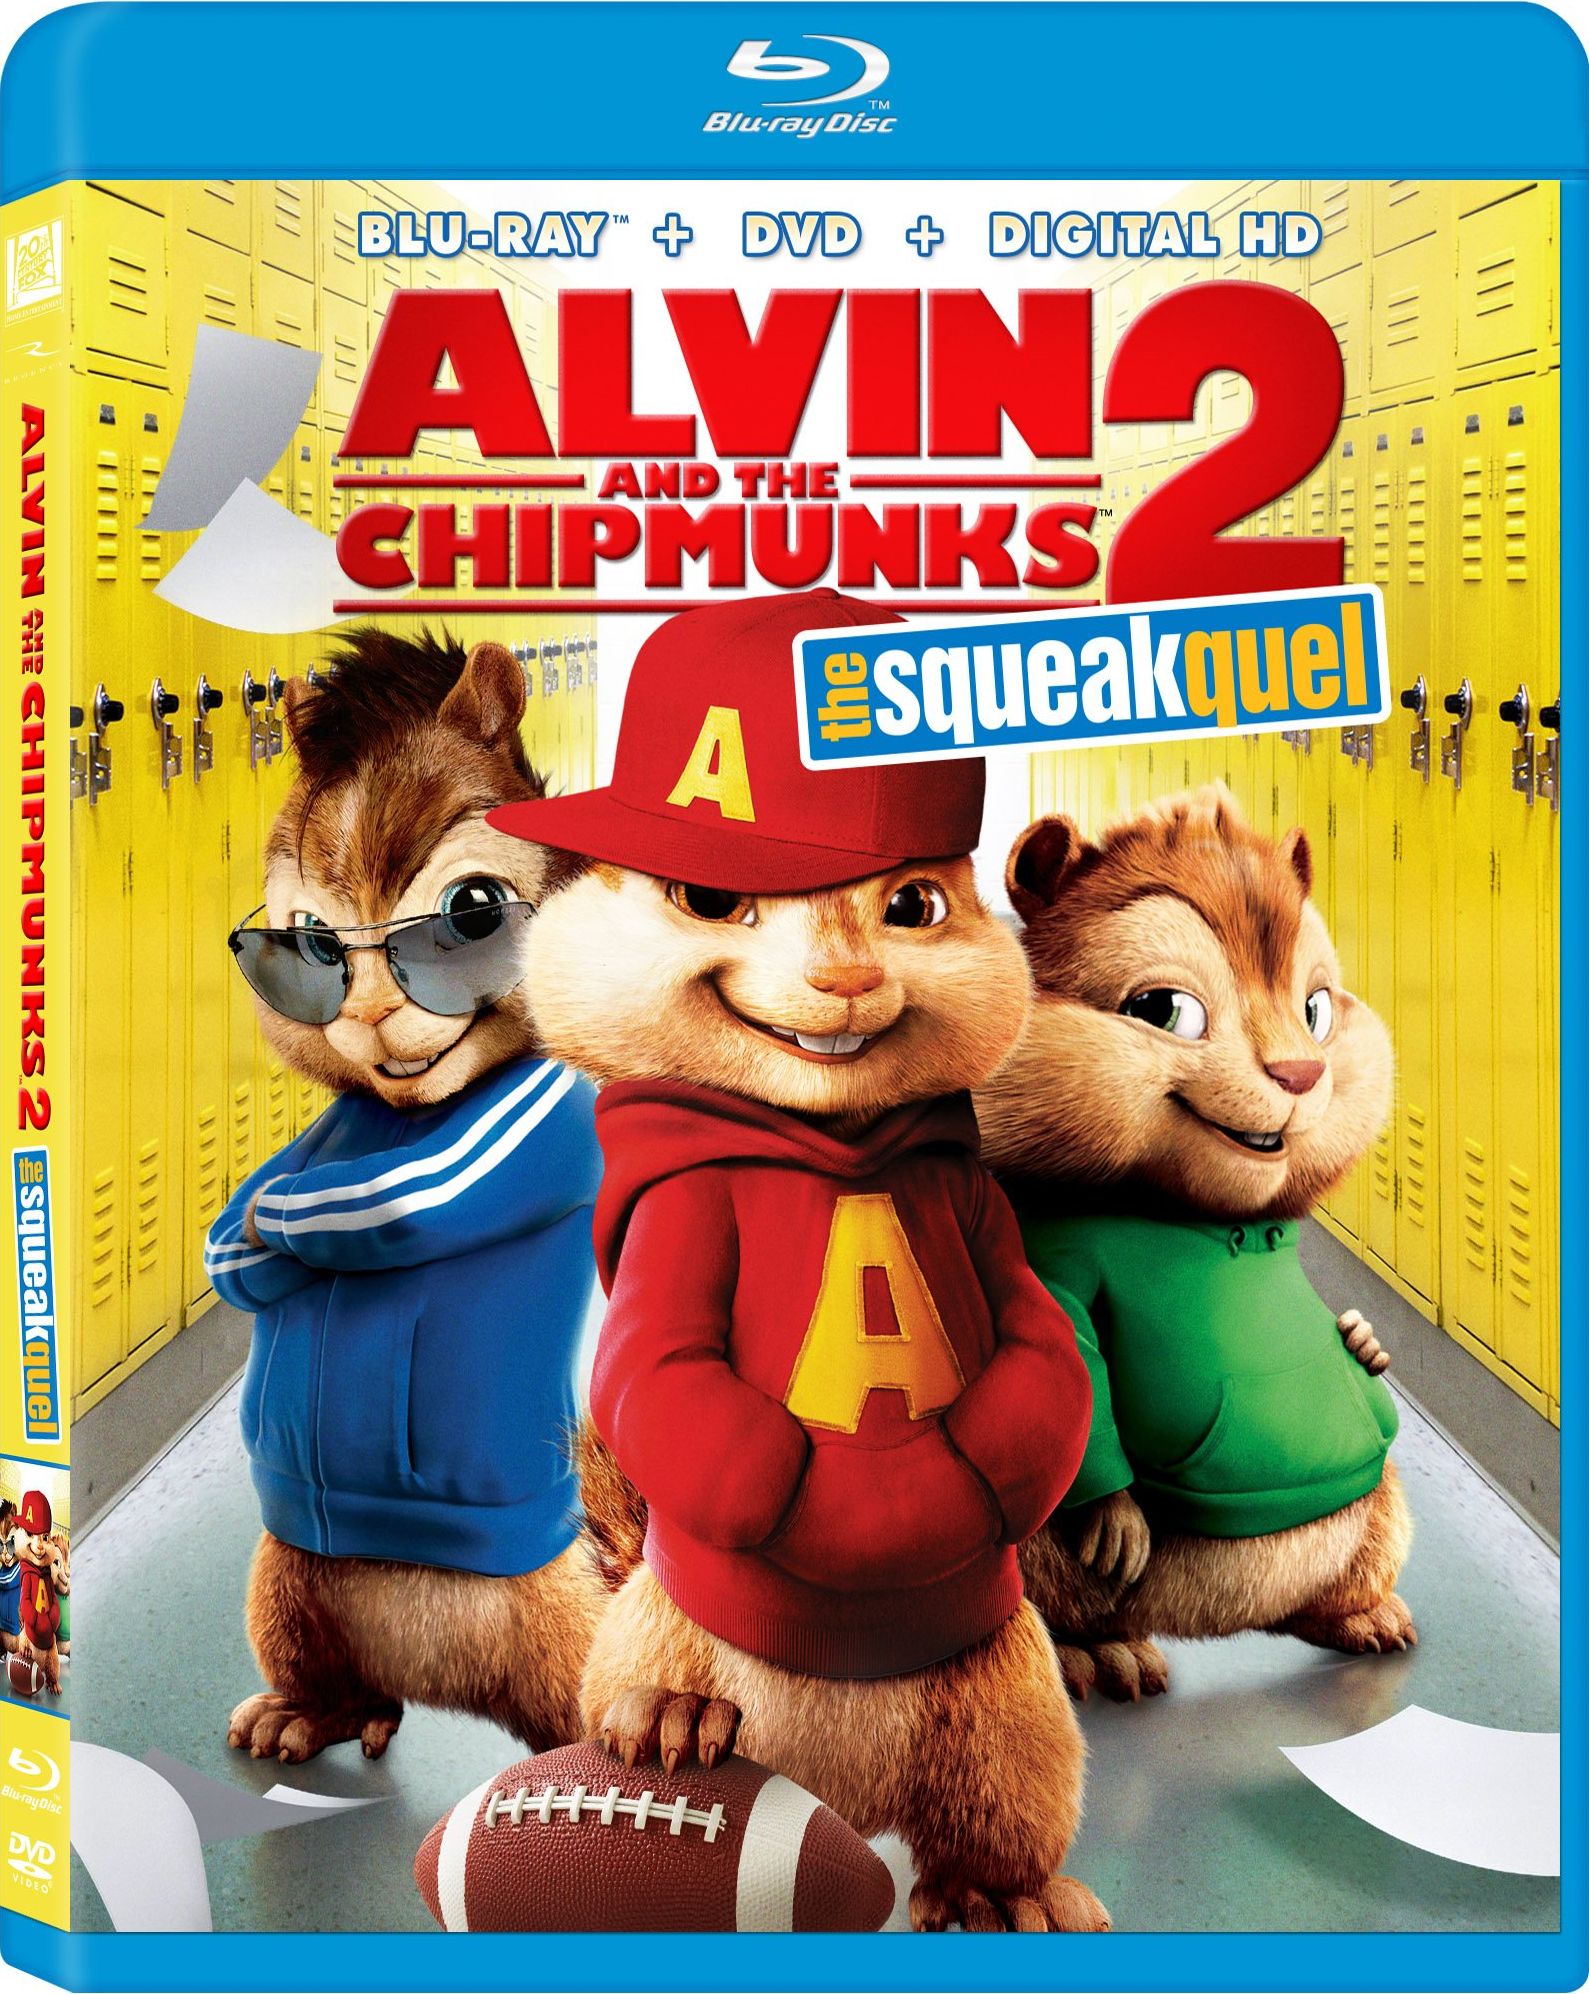 Alvin And The Chipmunks: The Squeakquel #4